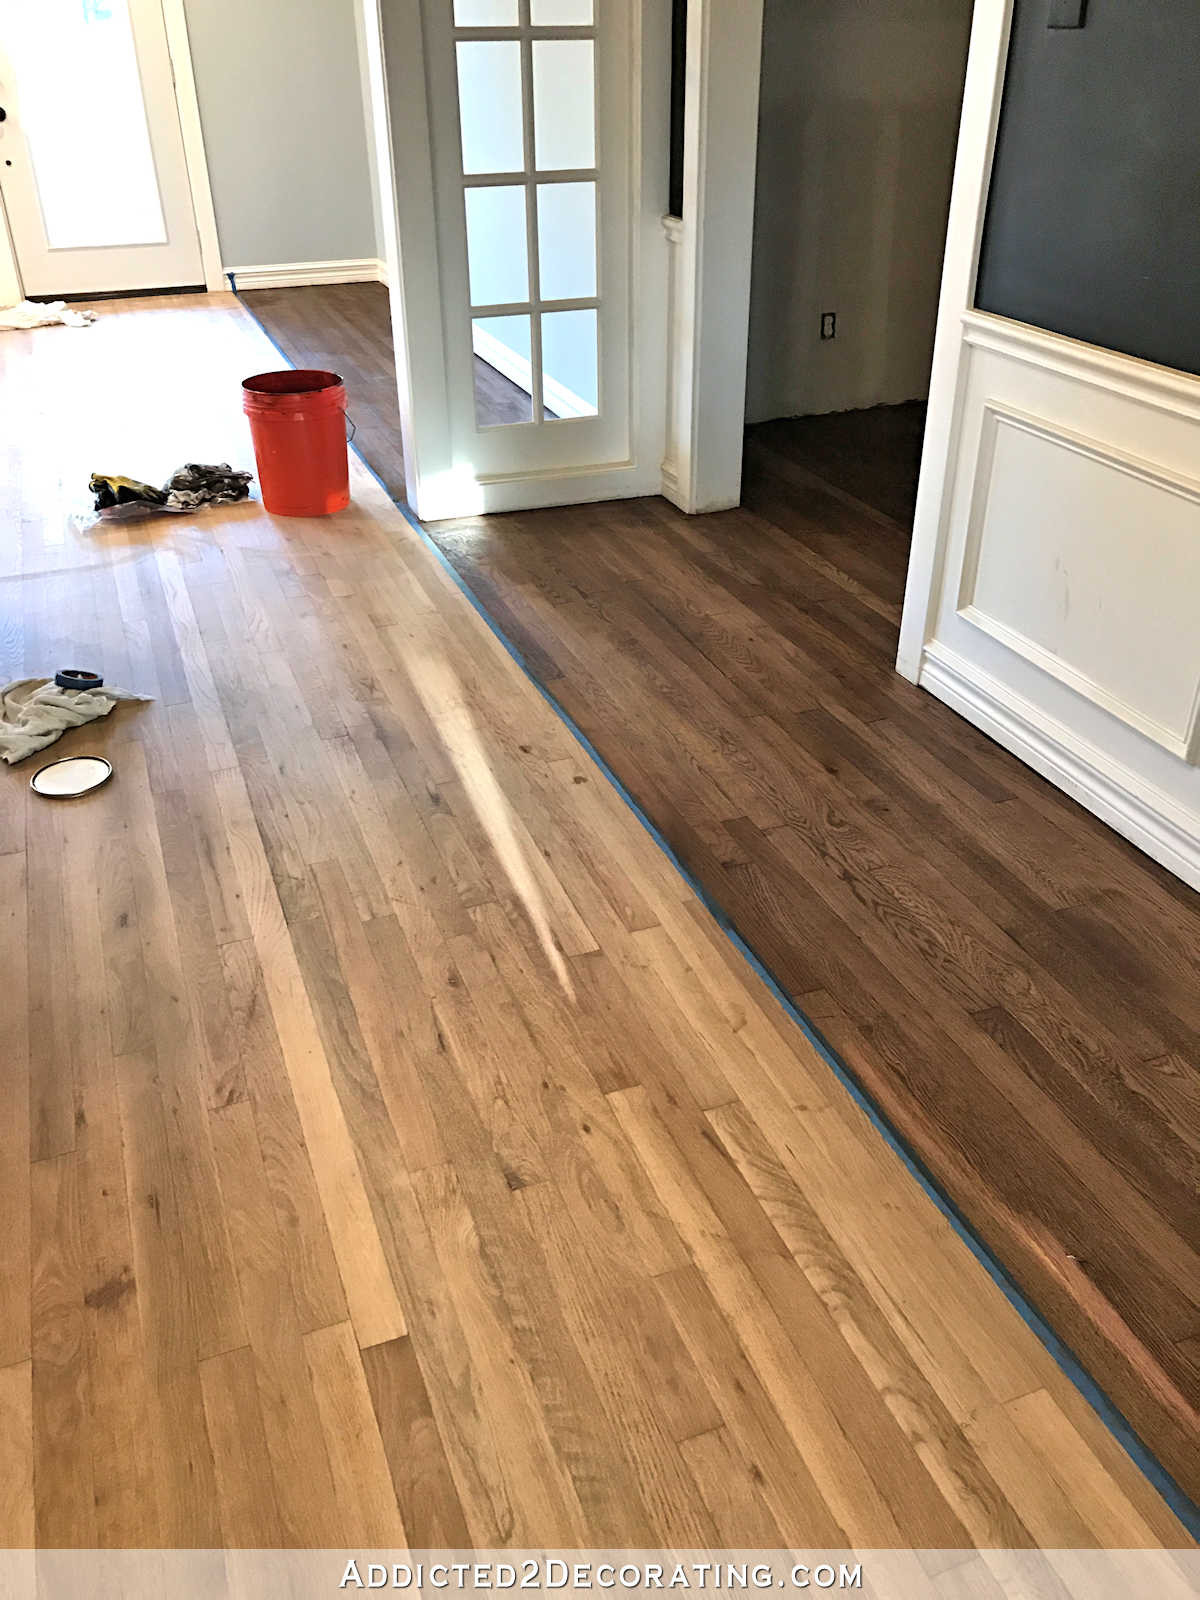 23 Fabulous How Much to Refinish Engineered Hardwood Floors 2024 free download how much to refinish engineered hardwood floors of how much to refinish wood floors adventures in staining my red oak for how much to refinish wood floors adventures in staining my red oak h